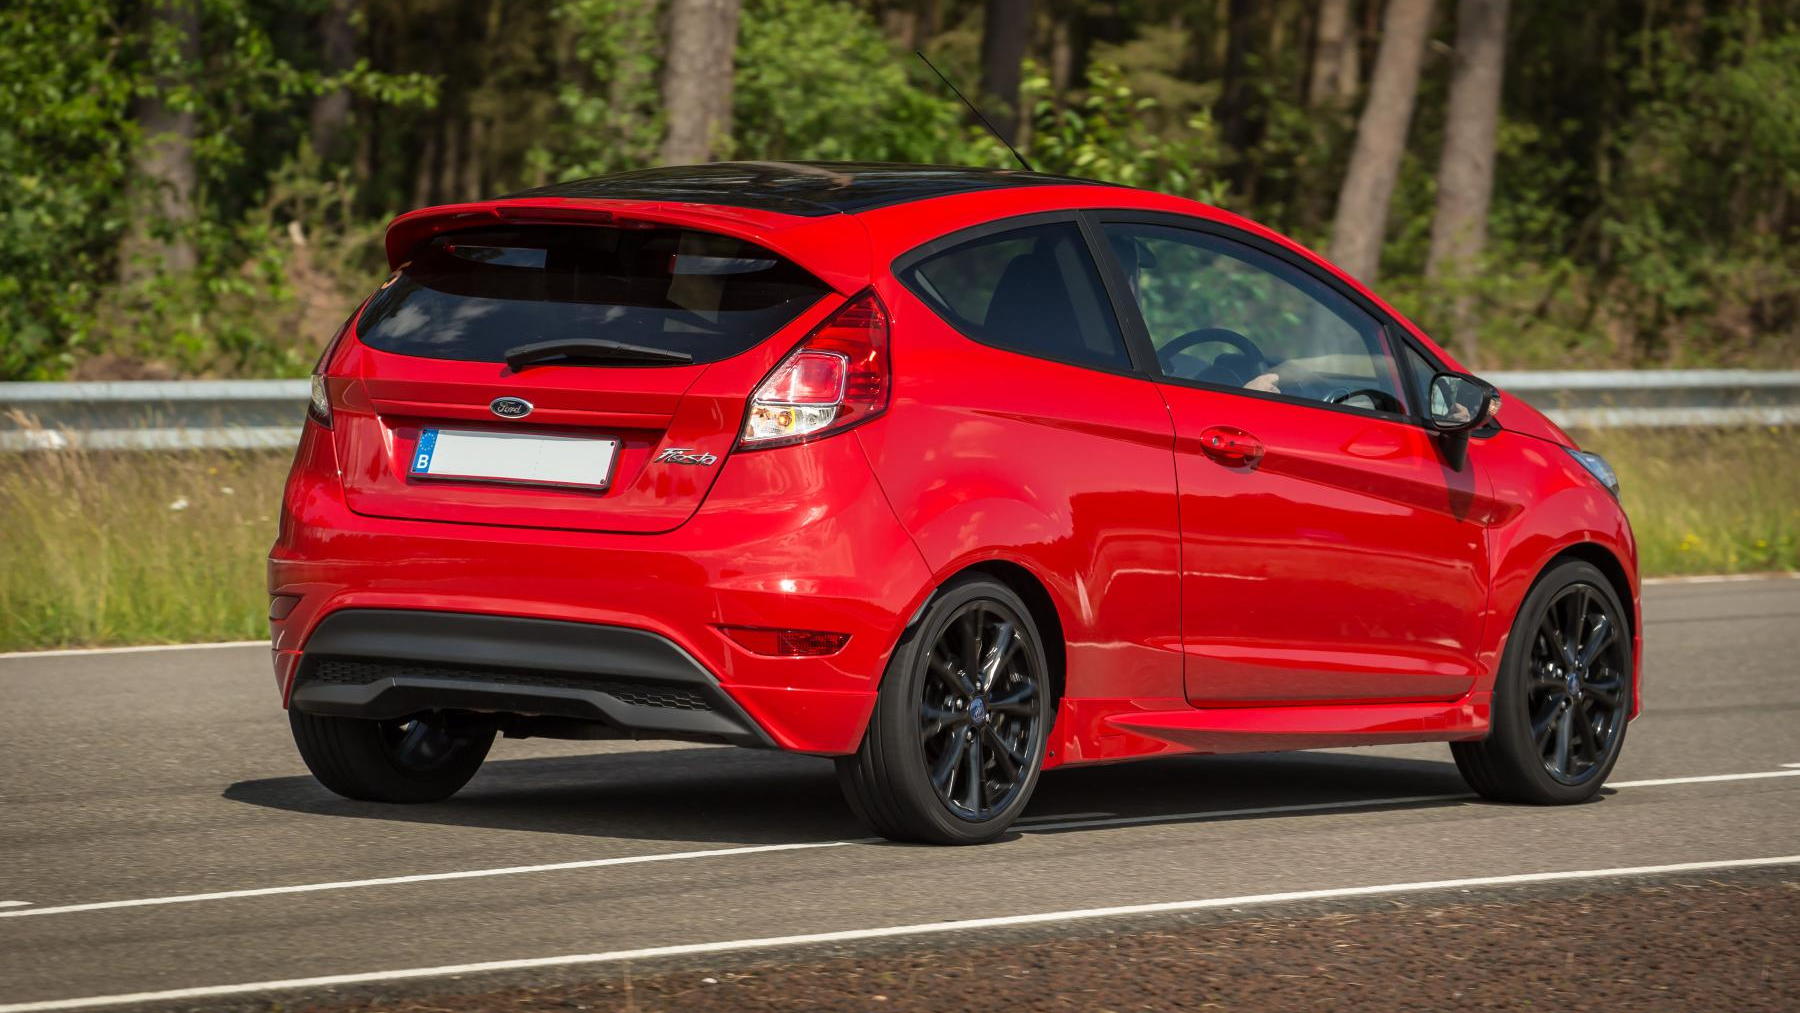 Ford Fiesta Red and Black 1.0 Ecoboost